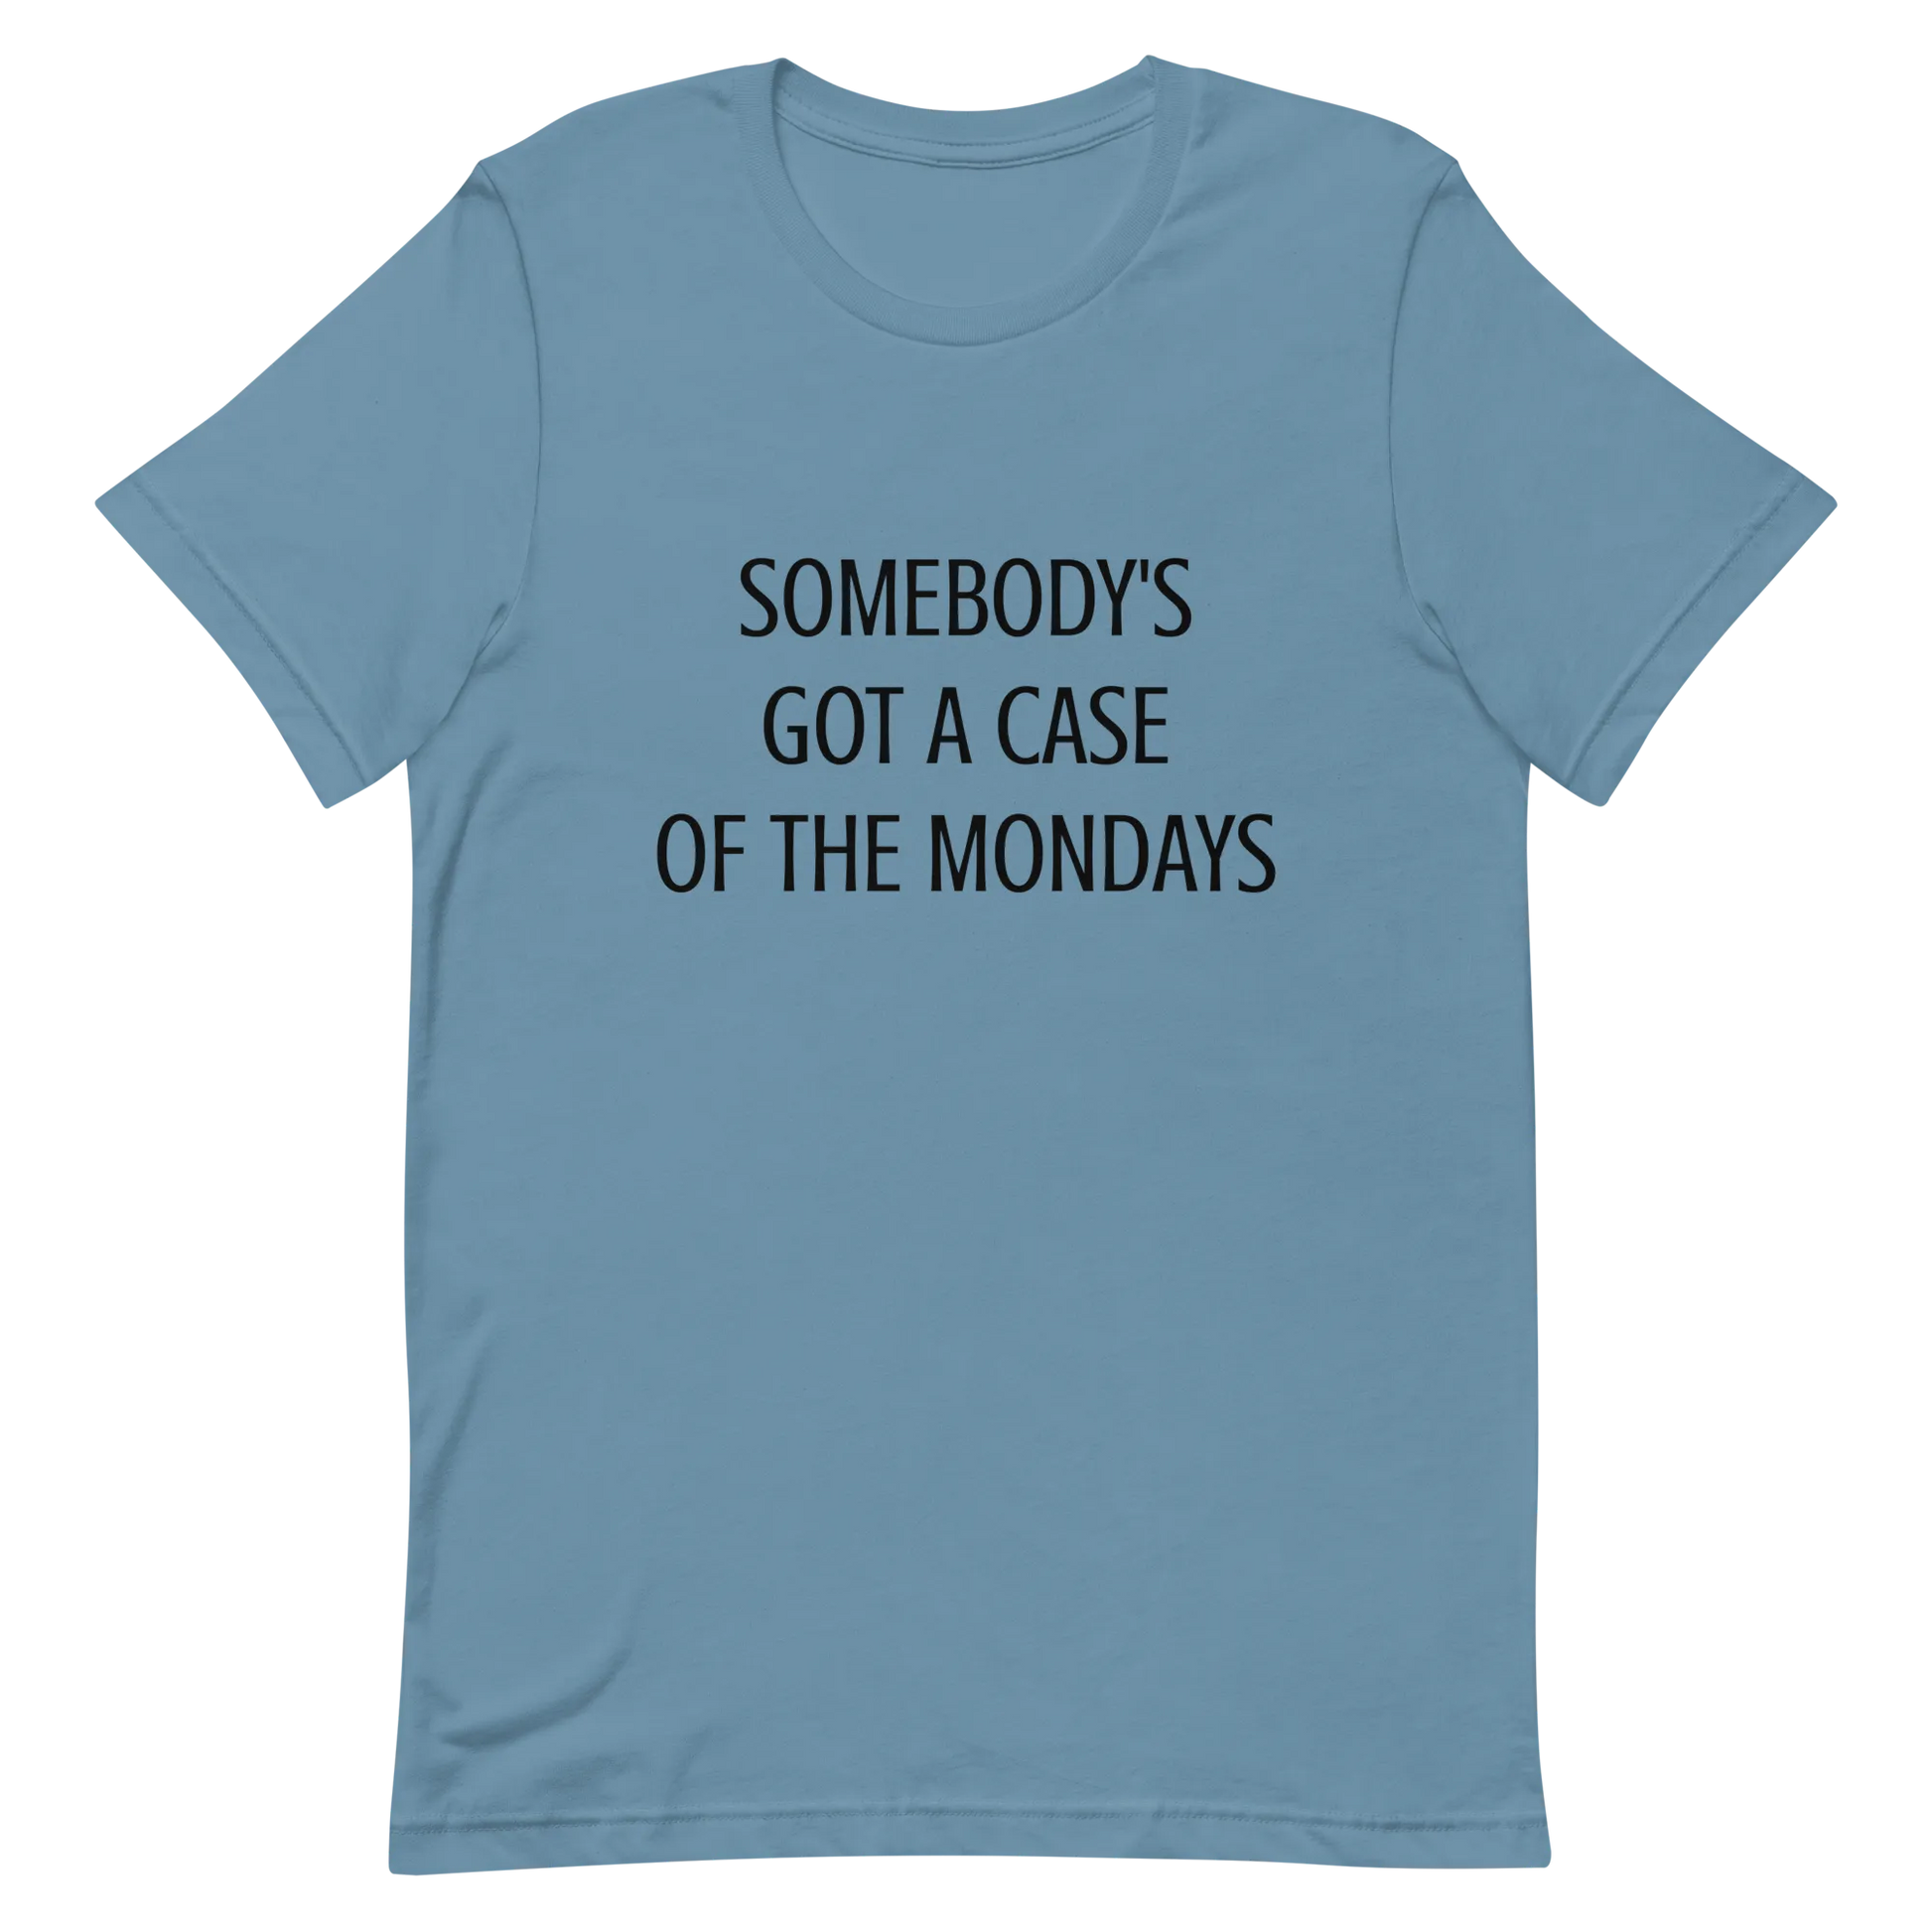 Somebody's Got a Case of the Mondays Tee in Steel Blue flatlay